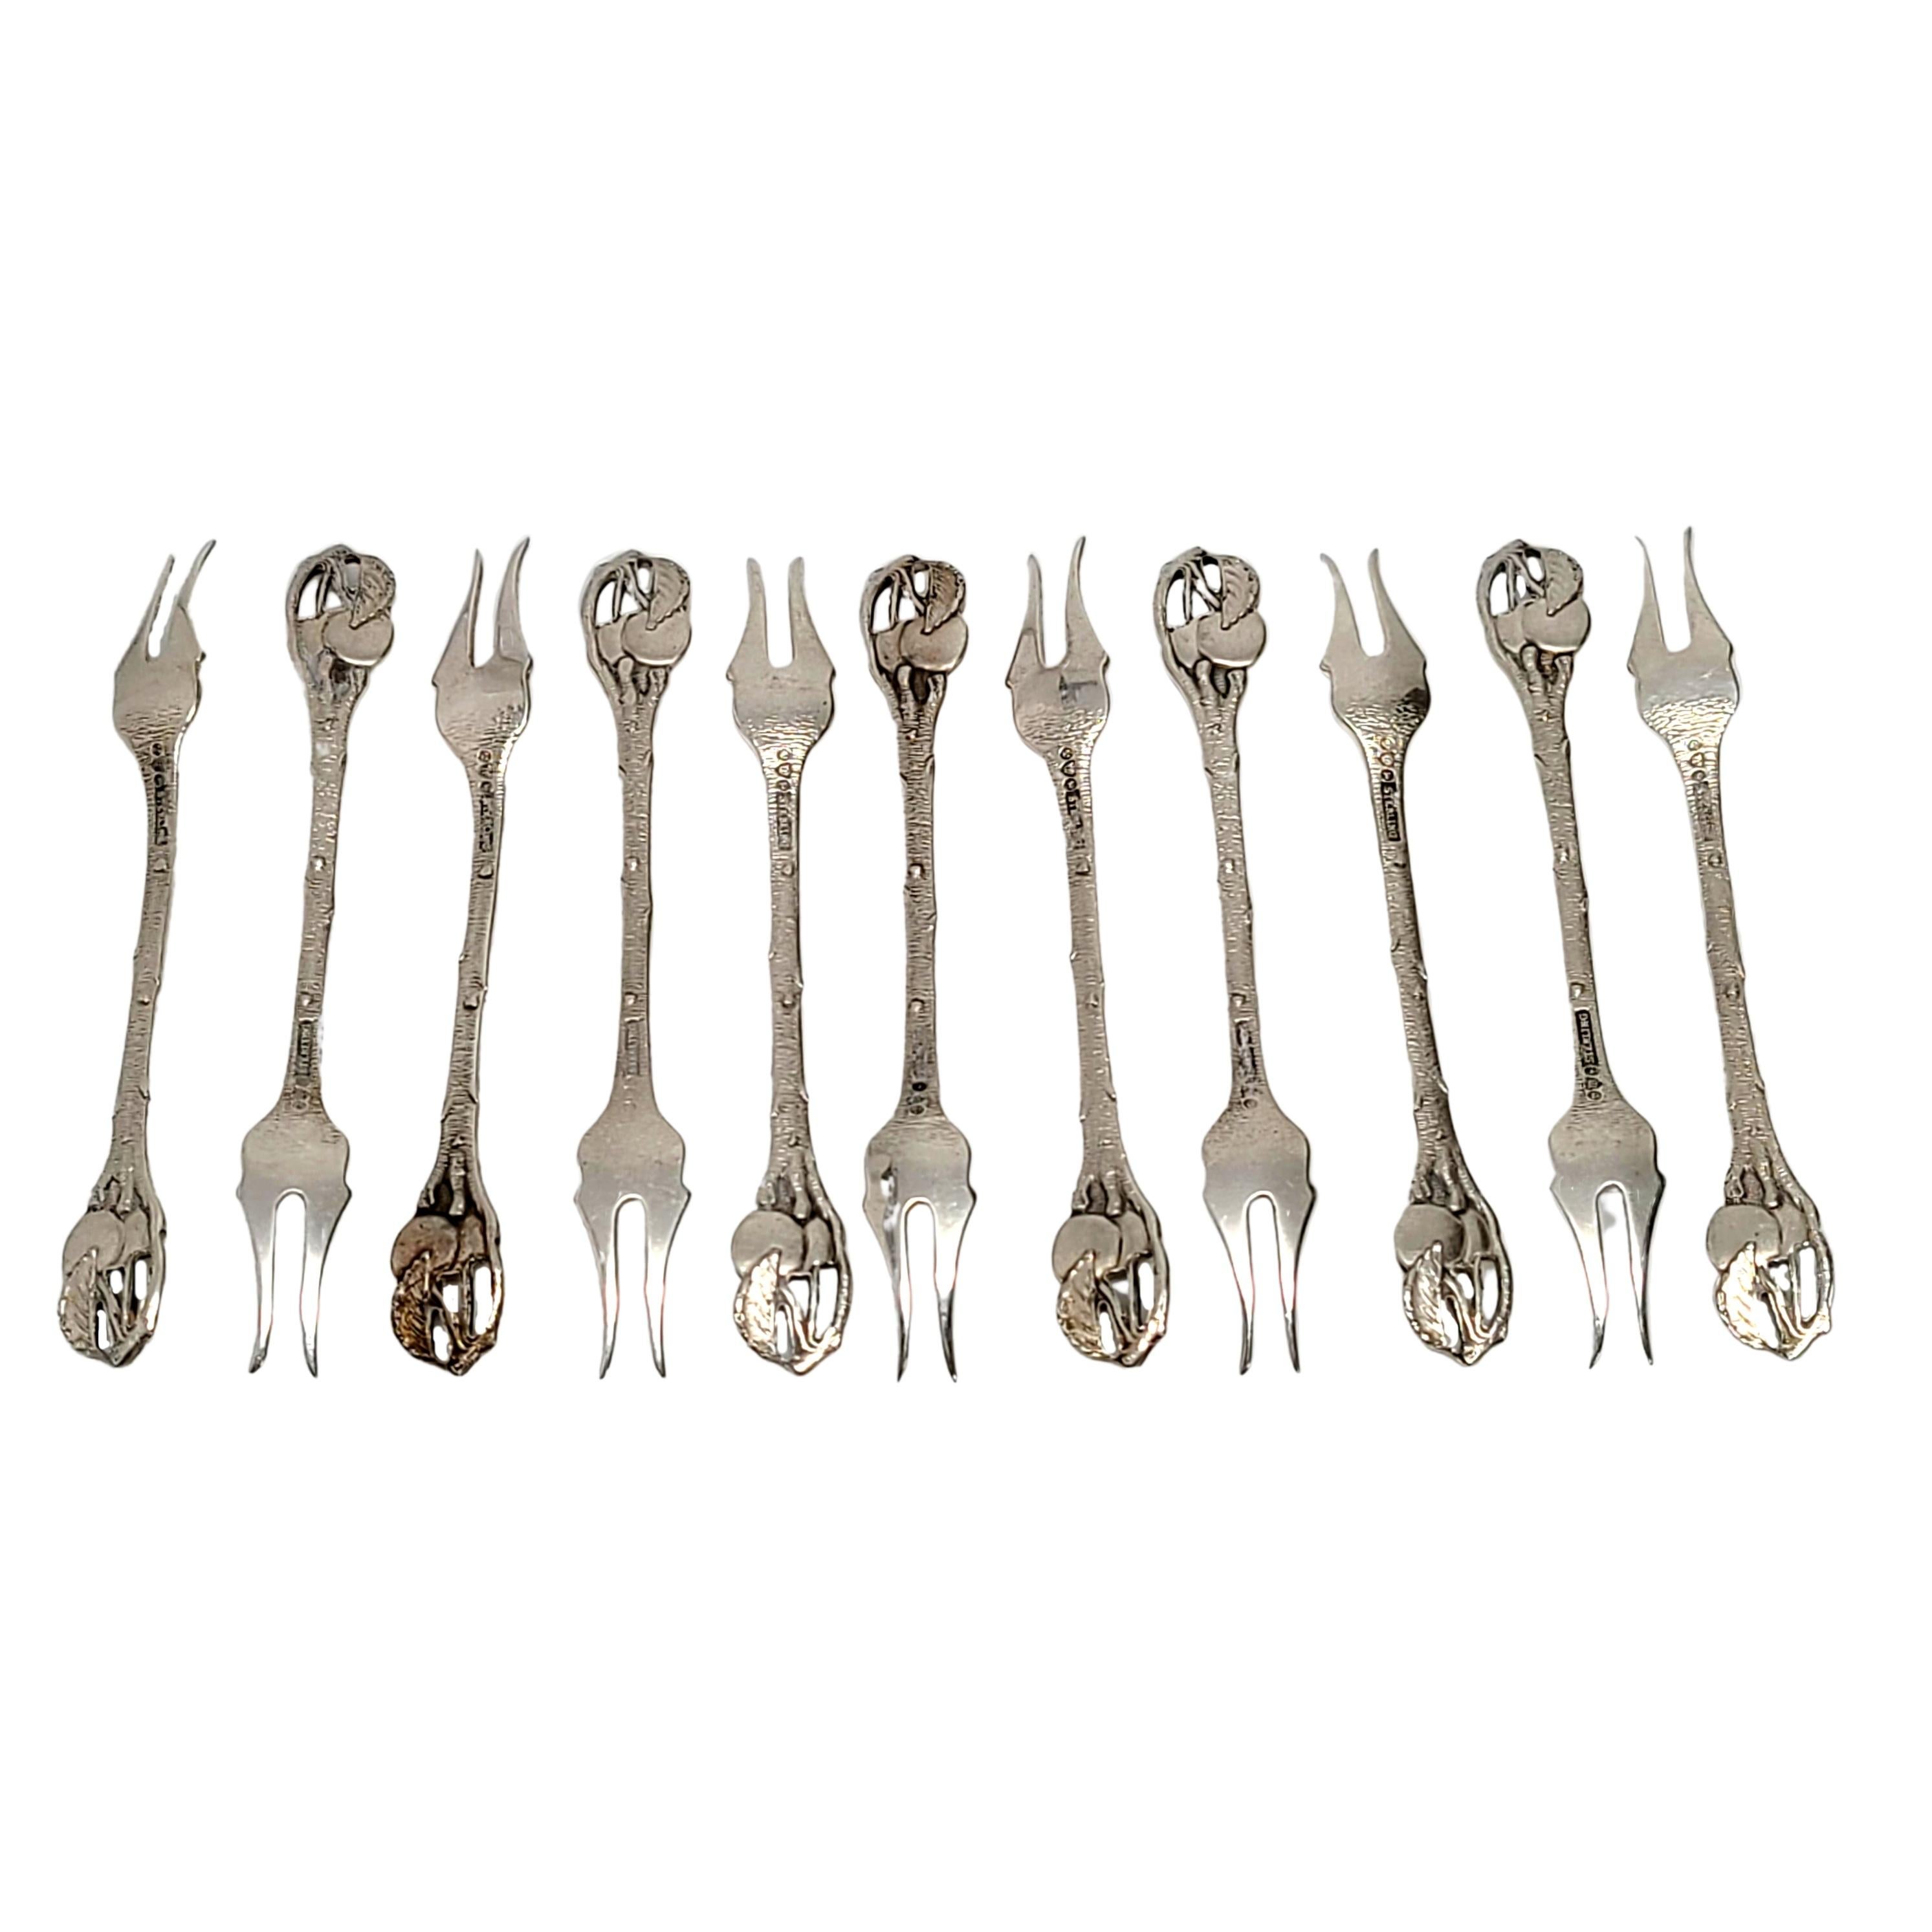 Set of 11 antique sterling silver cherry forks by Watson Co.

No monogram.

Beautiful set of small forks with cherries on the top of the handles, two curved tines.

Measures approx 3